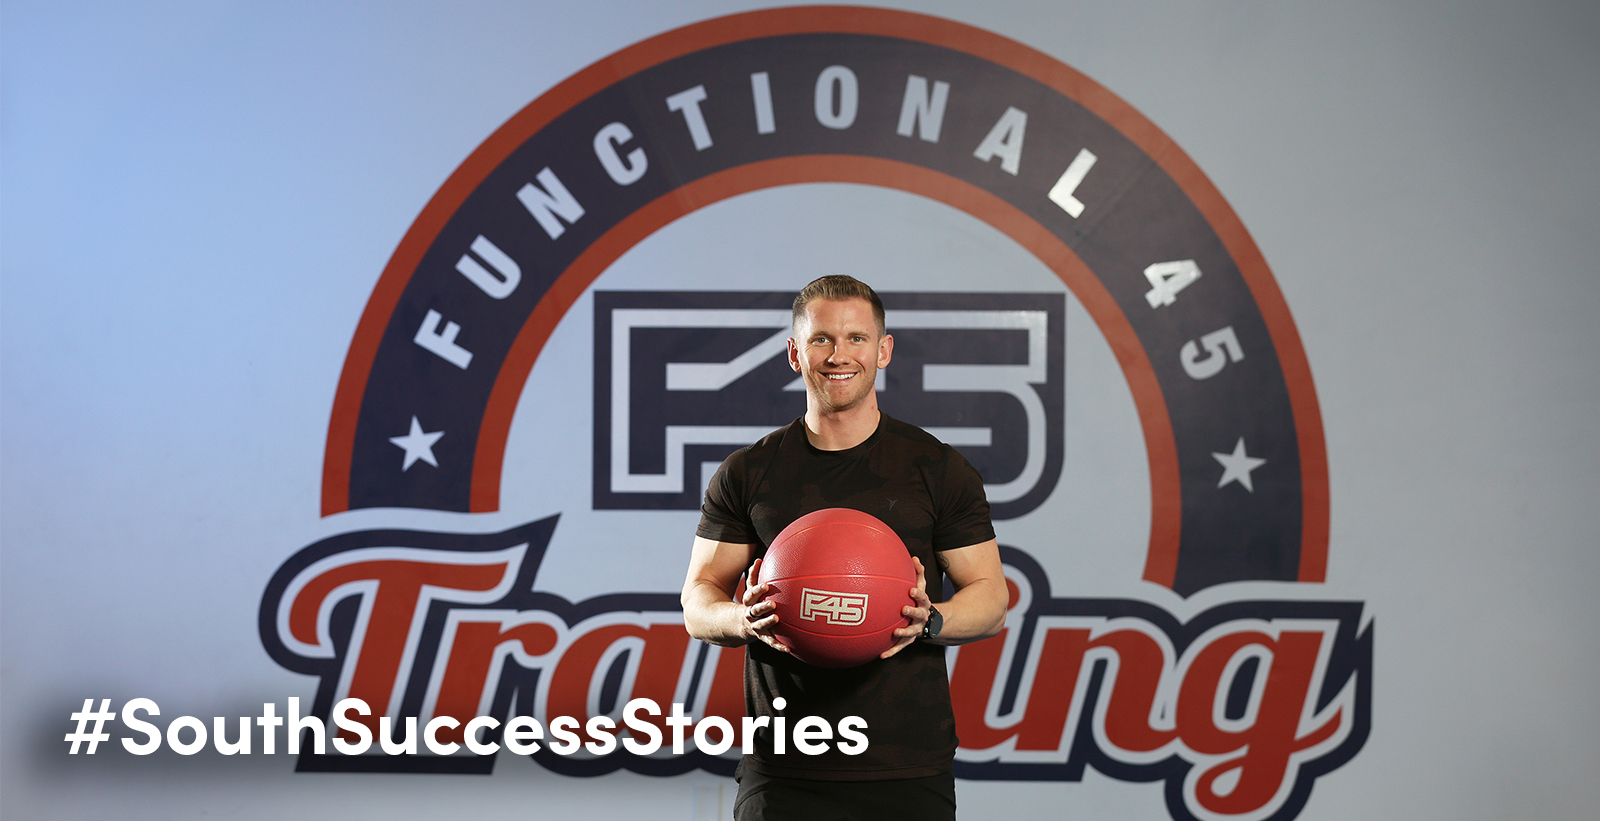 Andy Vickers, a graduate of the University of South Alabama's Mitchell College of Business, opened two F45 fitness training studios and plans to open a third in Pensacola. 